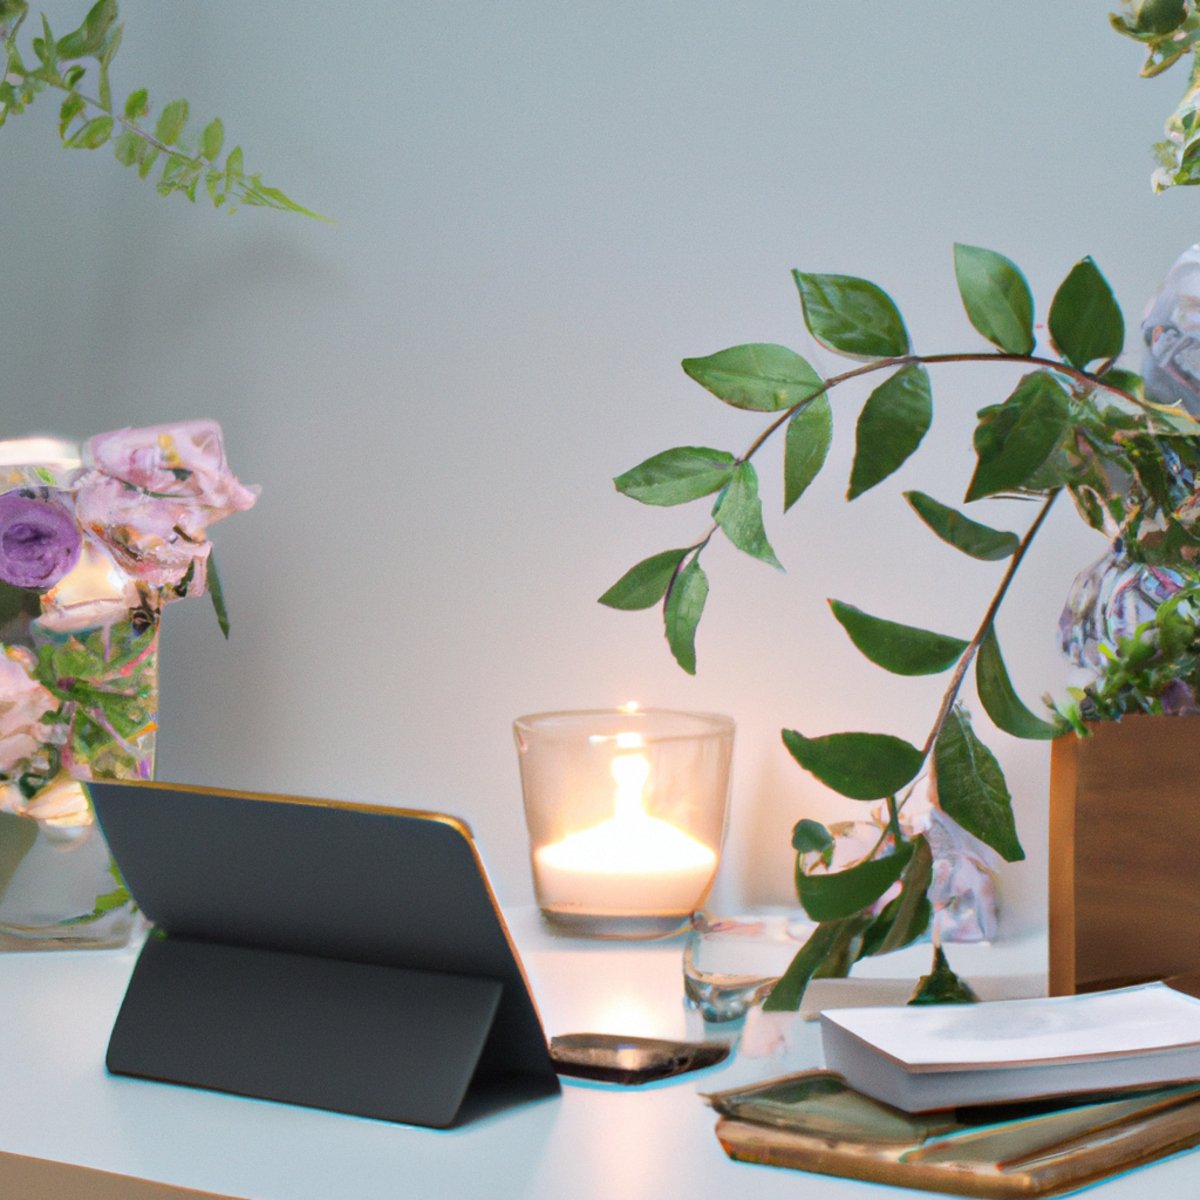 A serene workspace with a clutter-free desk, laptop, books, plant, tea, and notepad, promoting self-care and work-life balance.